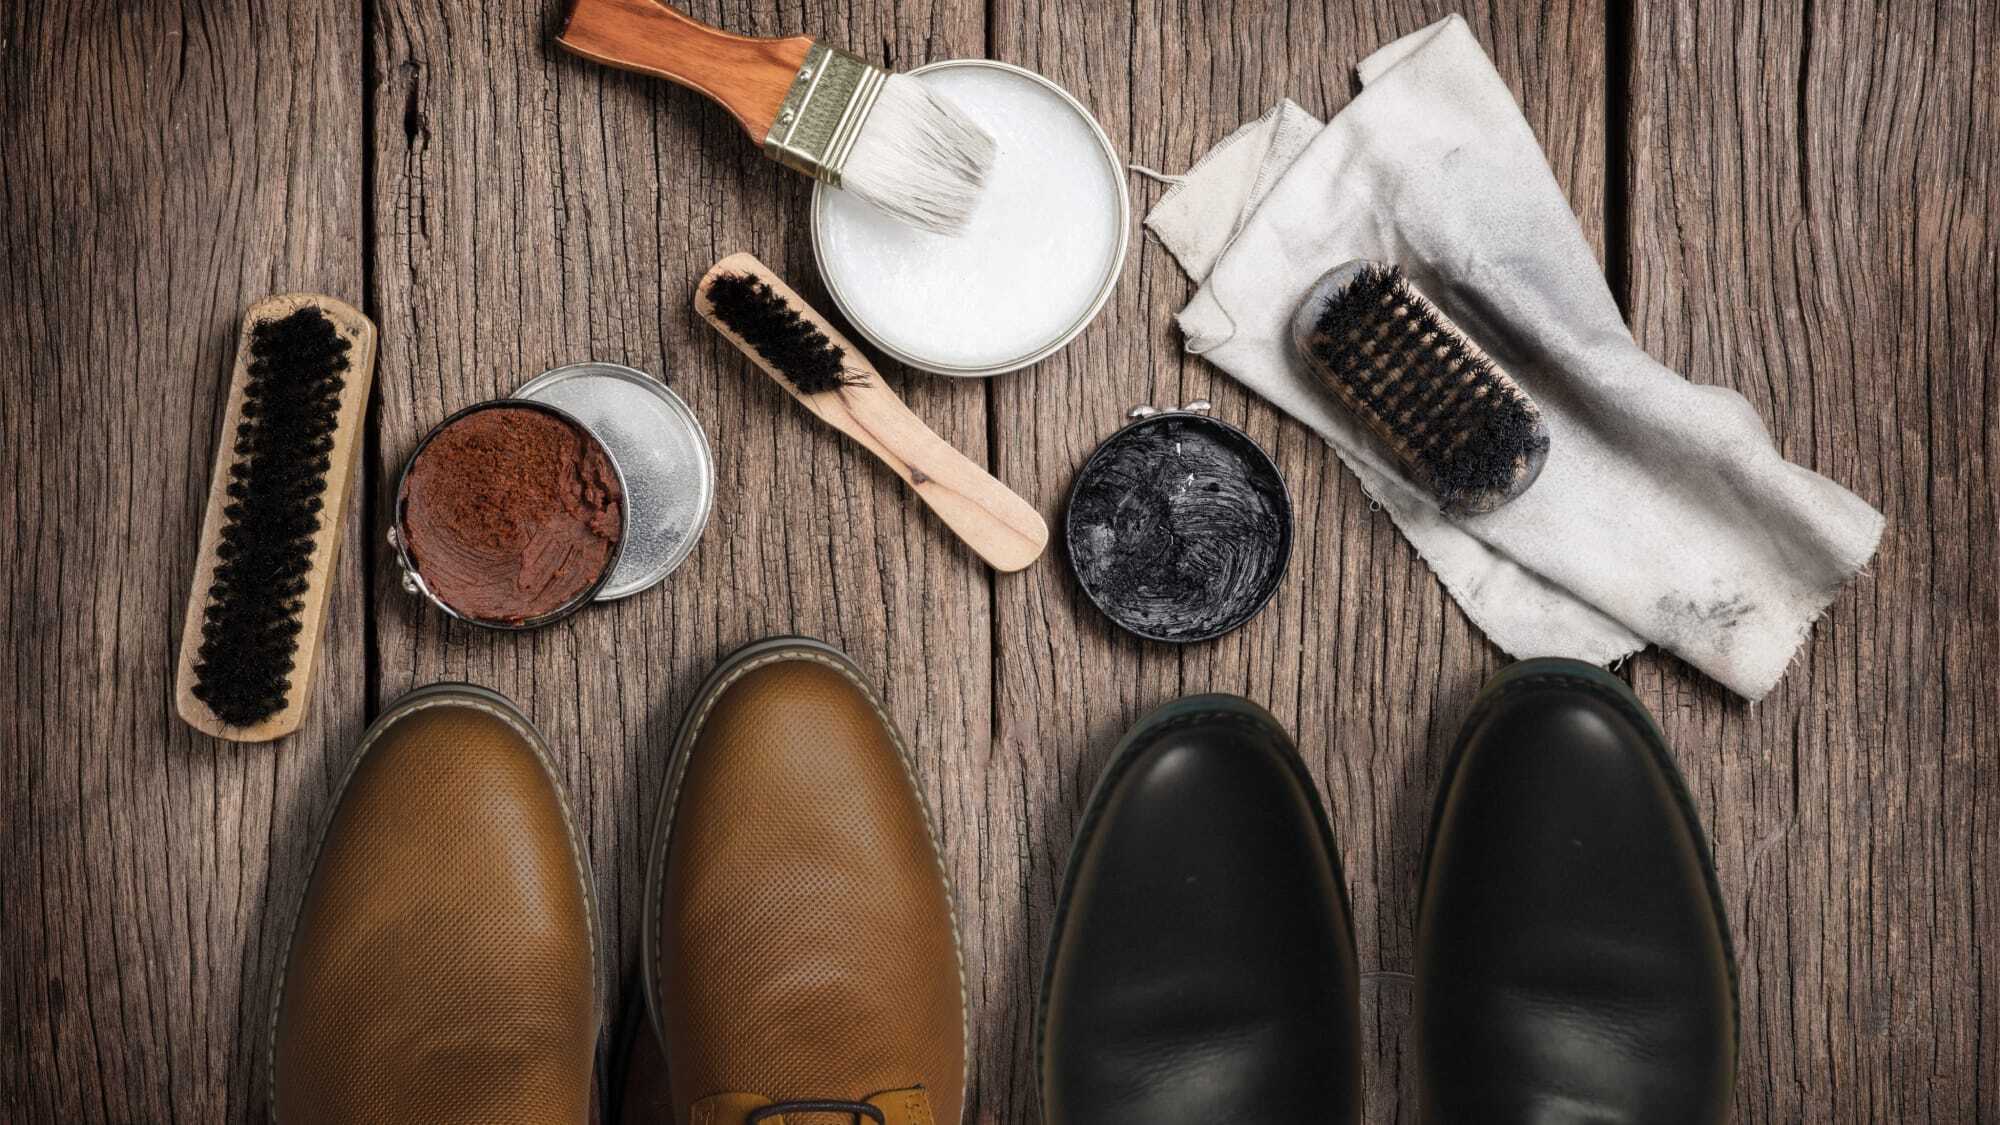 How to Properly Remove Stains from Your Leather Shoes – John